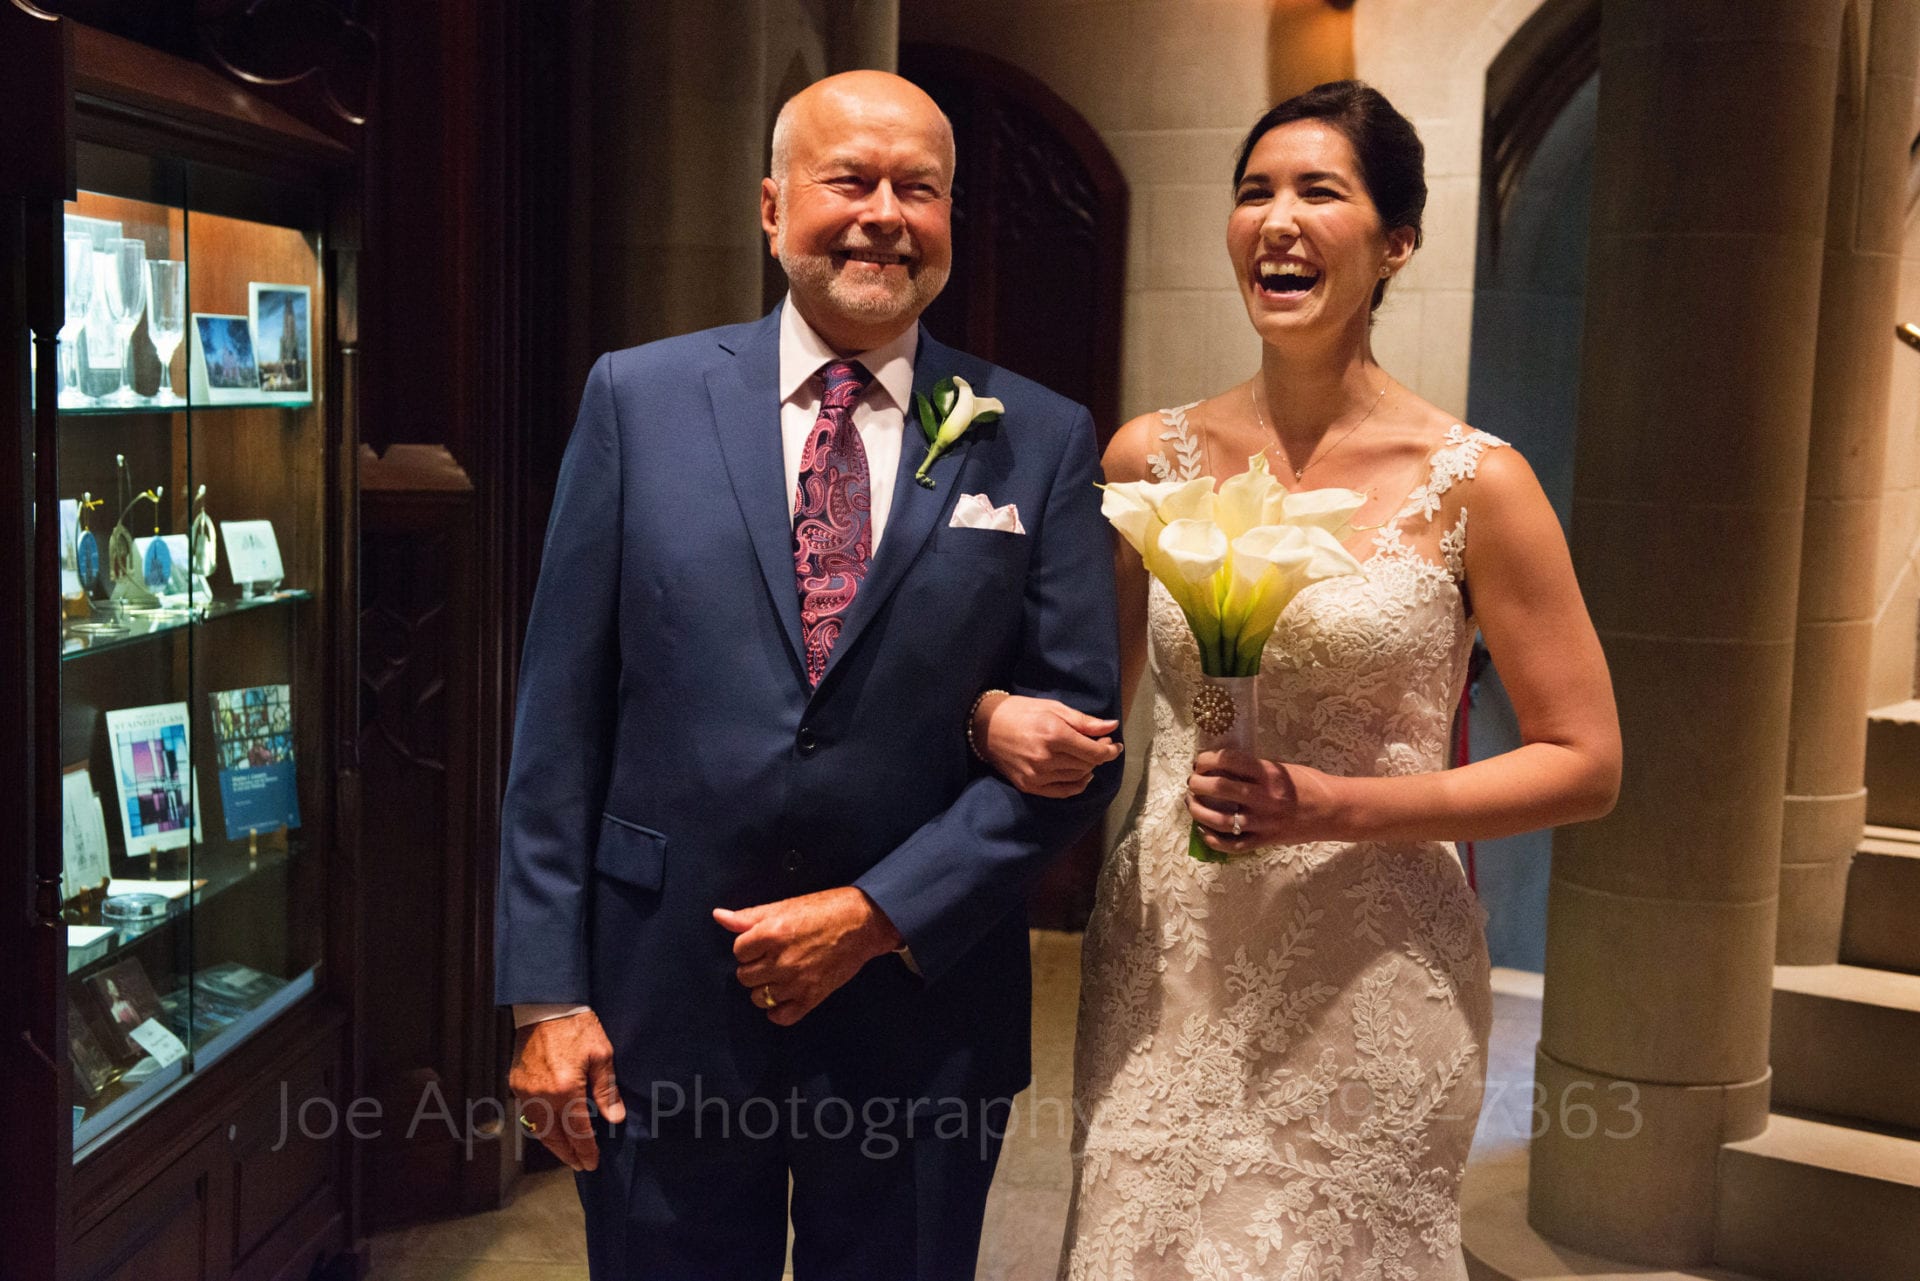 A bride holds her bouquet as she has her arm around her father's arm as they laugh during her Heinz Chapel and LeMont Wedding.